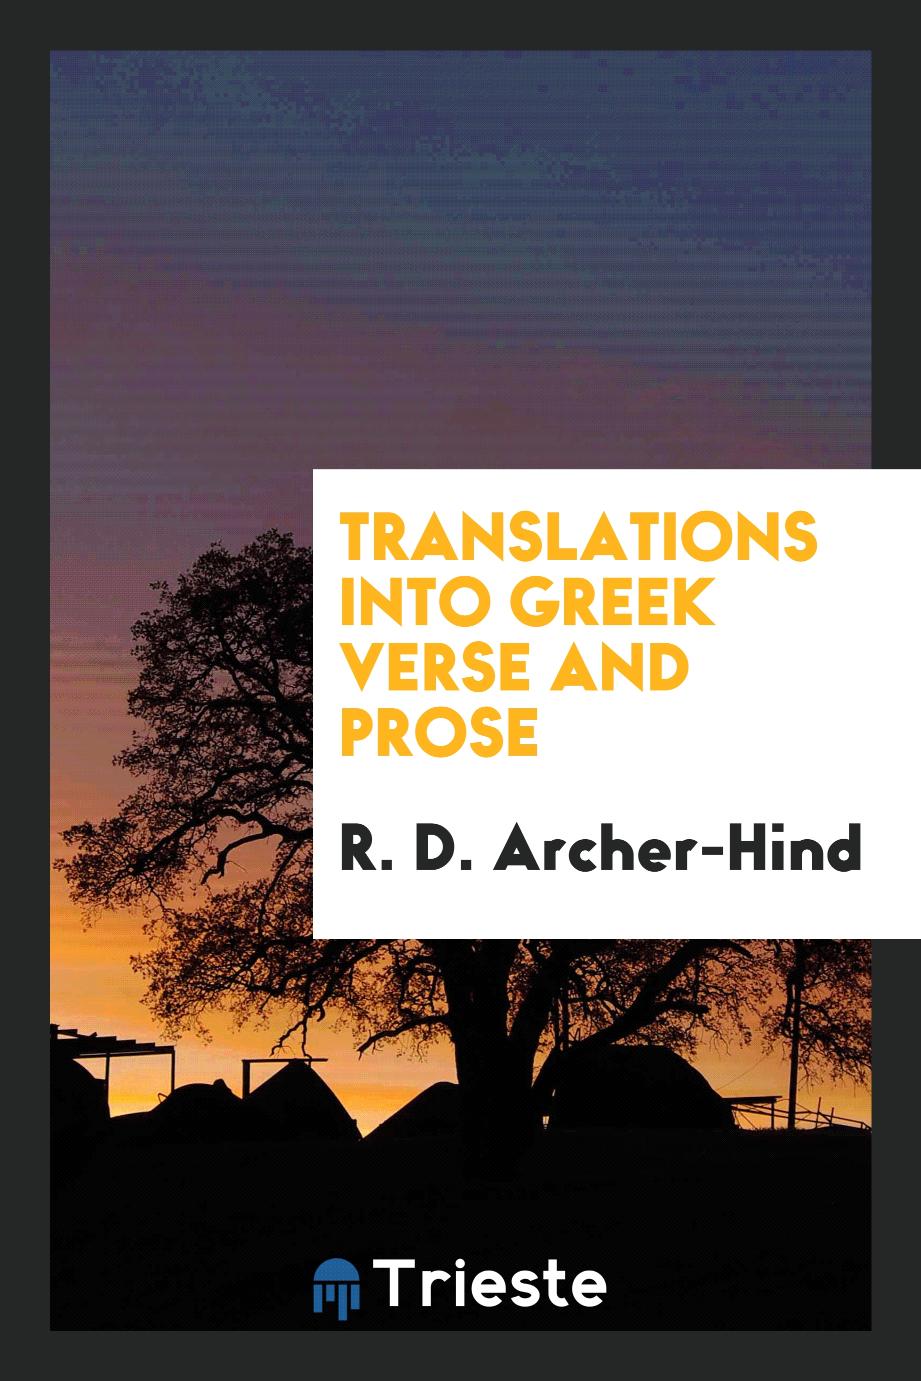 Translations into Greek verse and prose